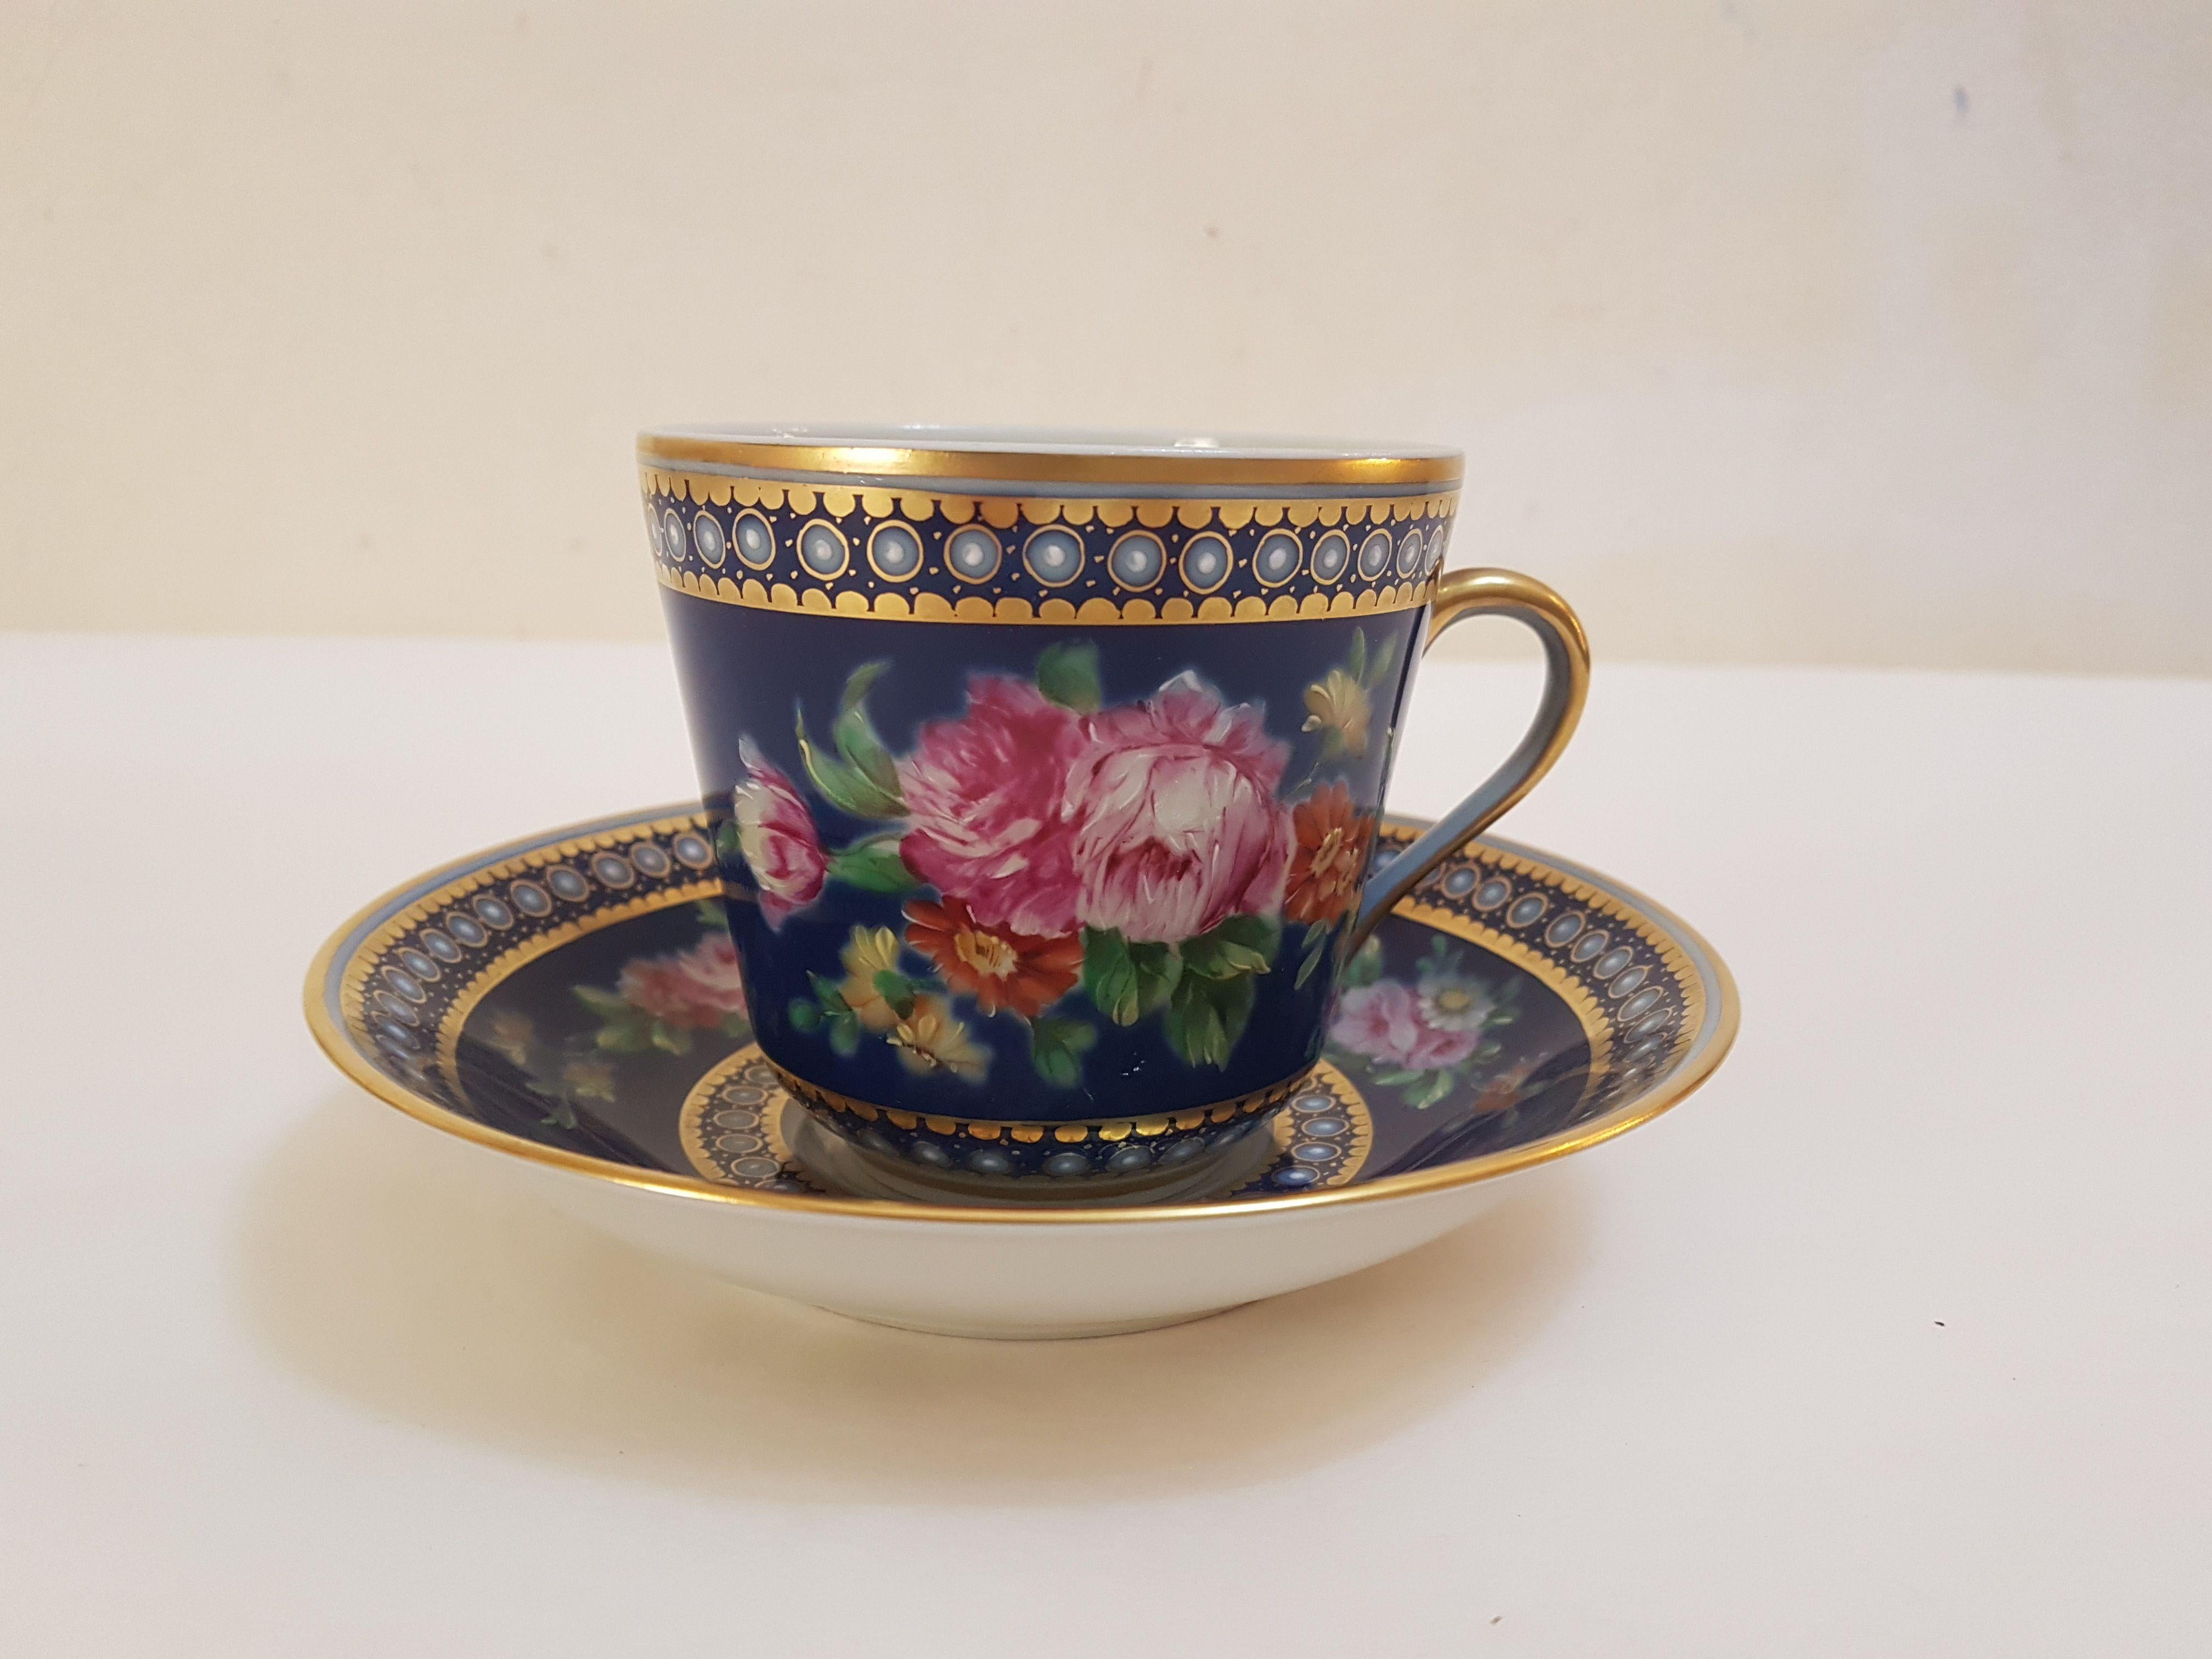 Magnificent collectible tea cup and saucer in portuguese porcelain Vista Alegre, hand painted, decorated with floral motifs.

Vista Alegre was founded in 1824 by Josè Ferreira Pinto Basto obtaining the royal diploma from His Majesty the King Don